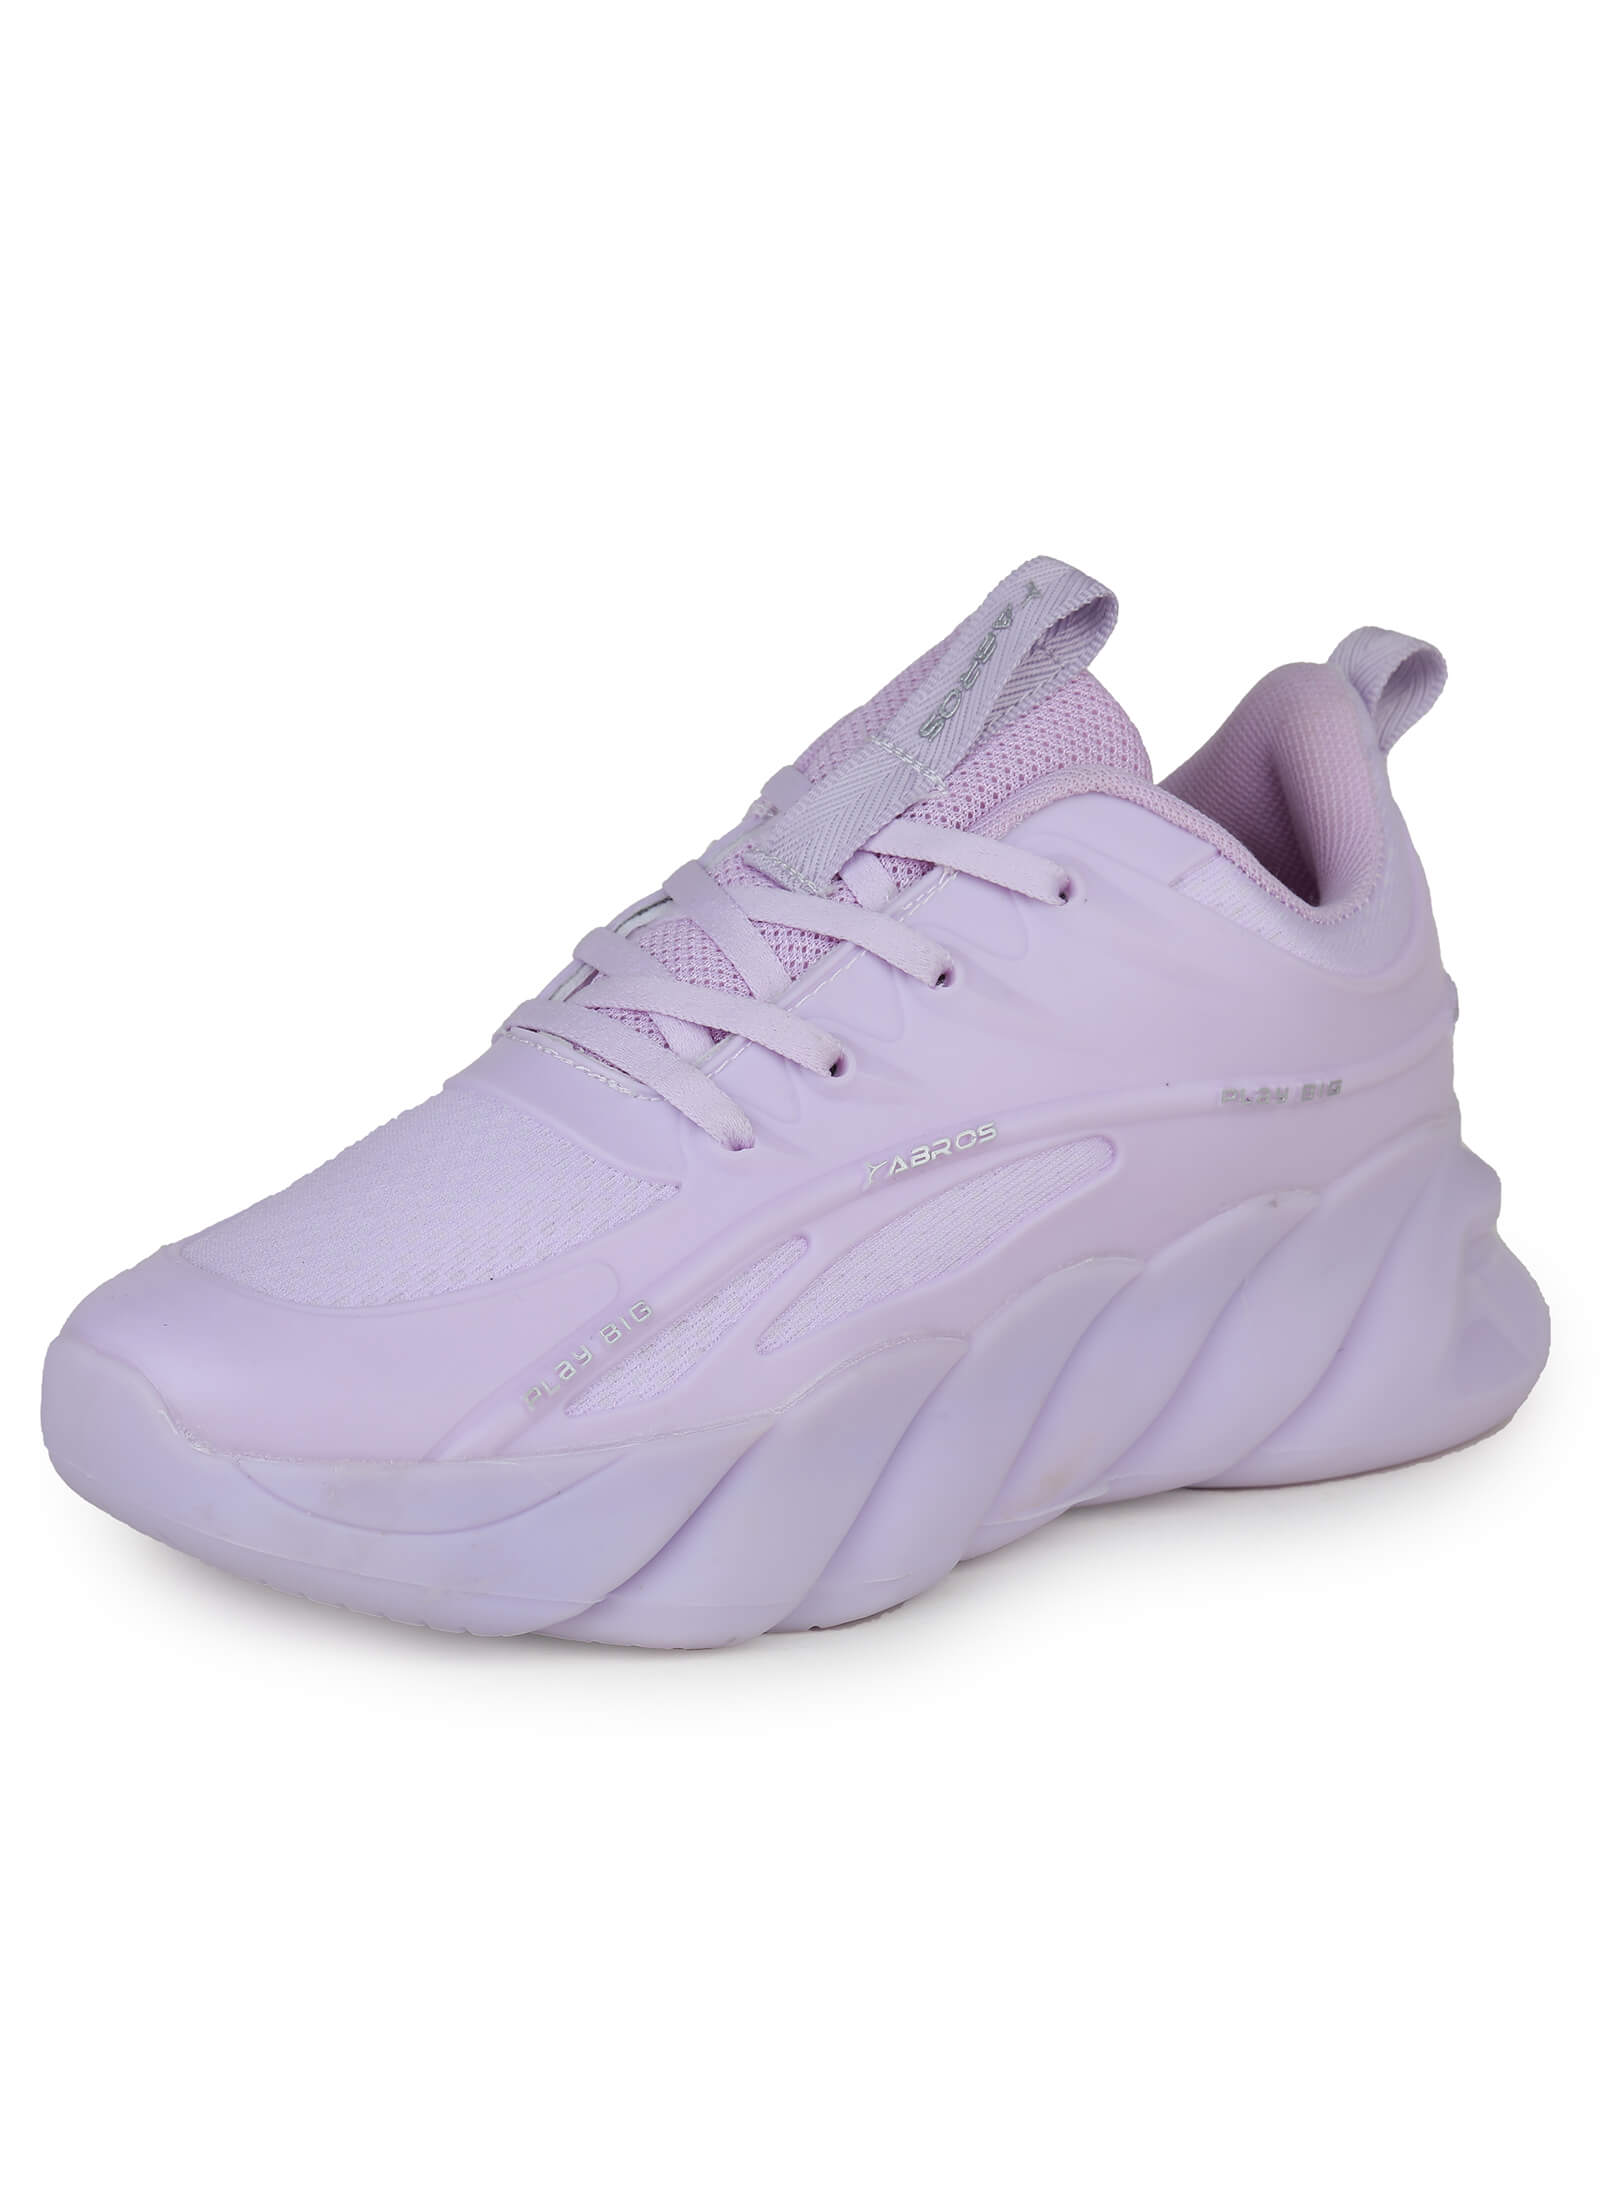 Angel-3 Sports Shoes For Women